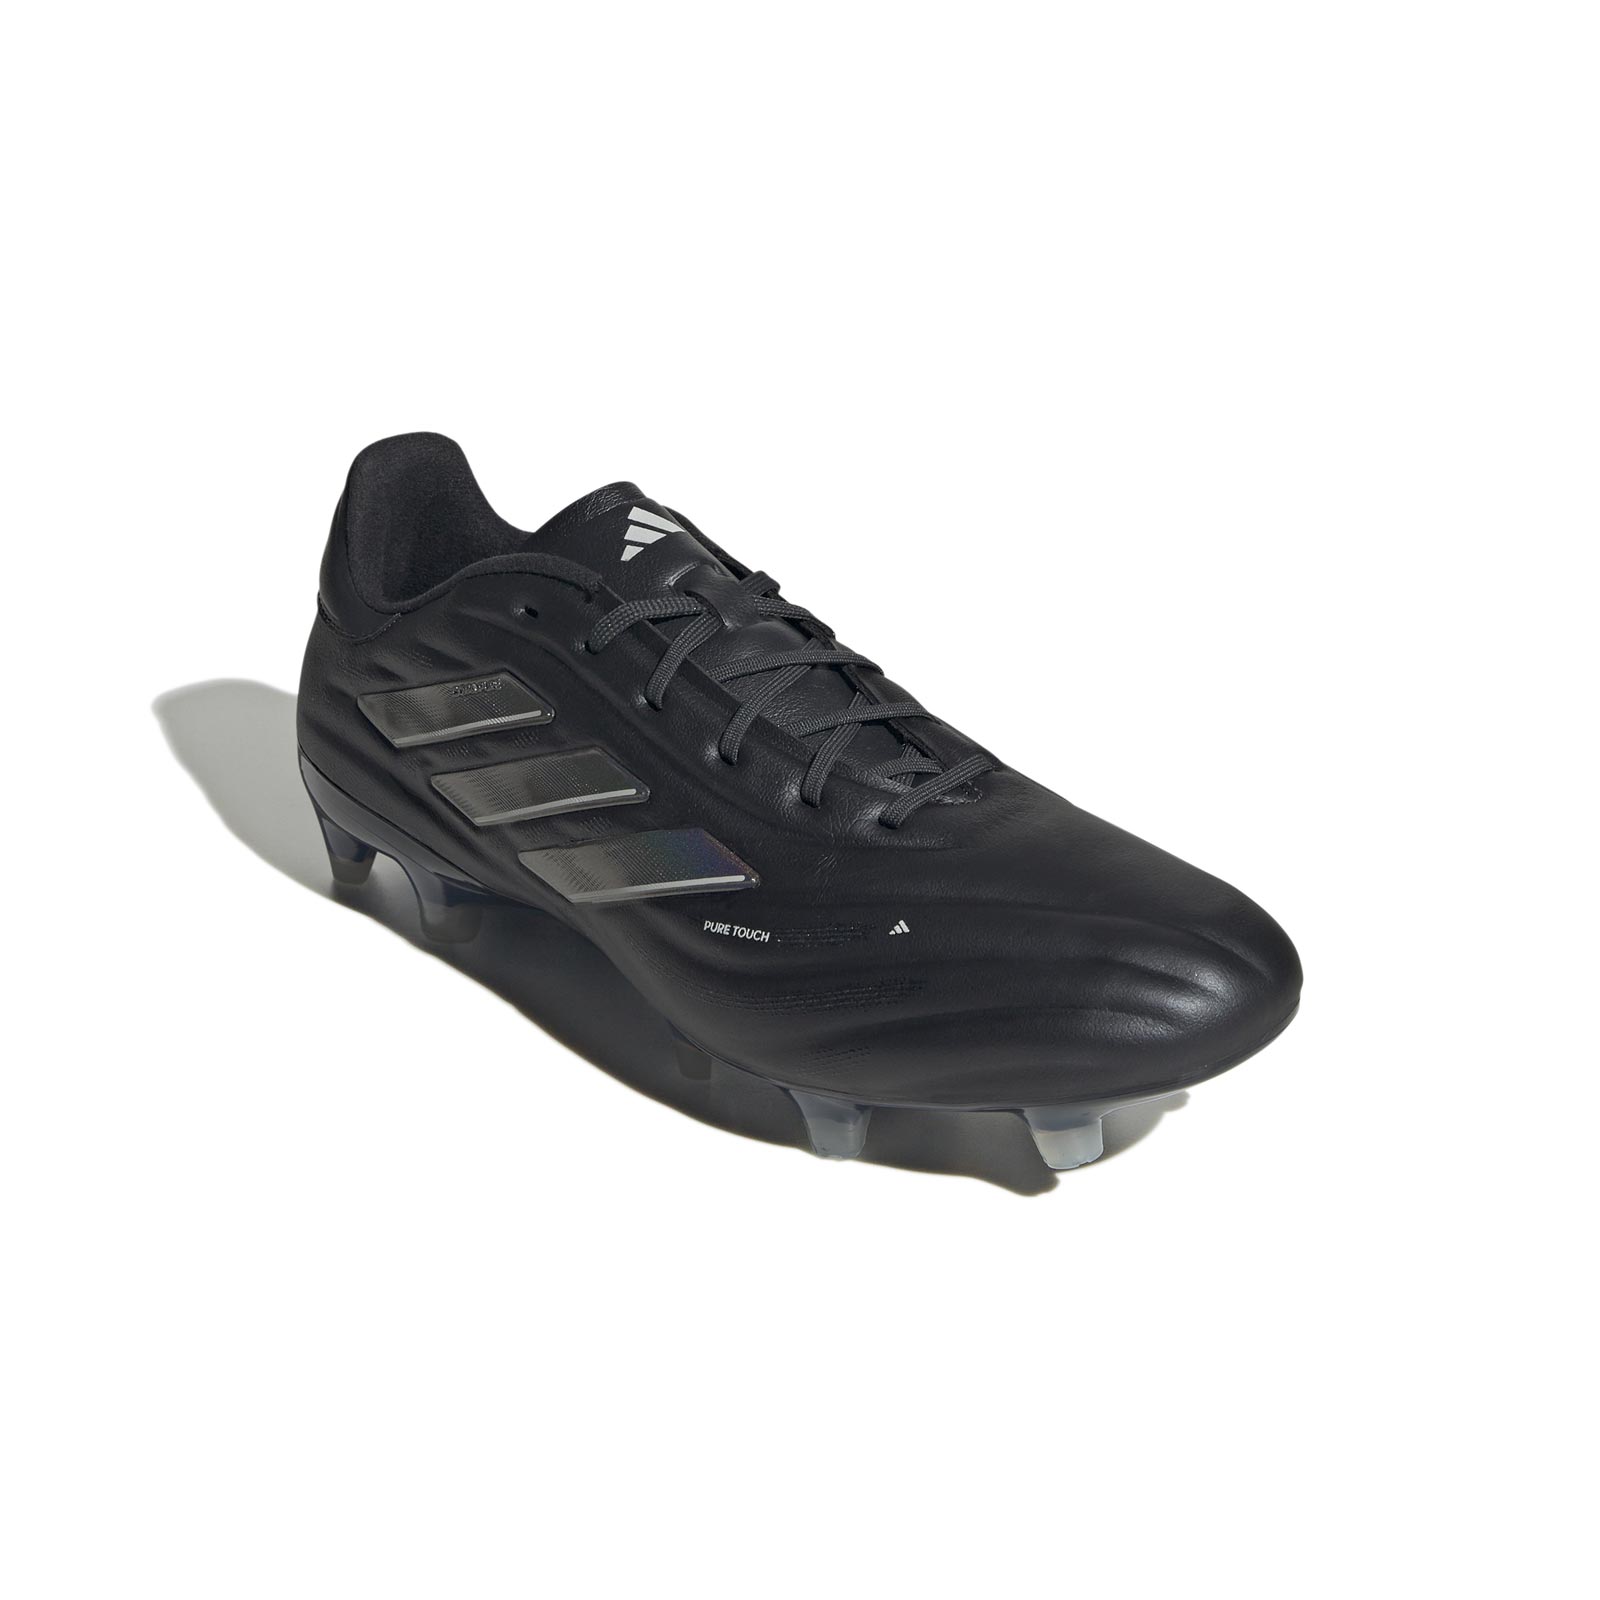 adidas Copa Pure 2 Elite Firm-Ground Boots